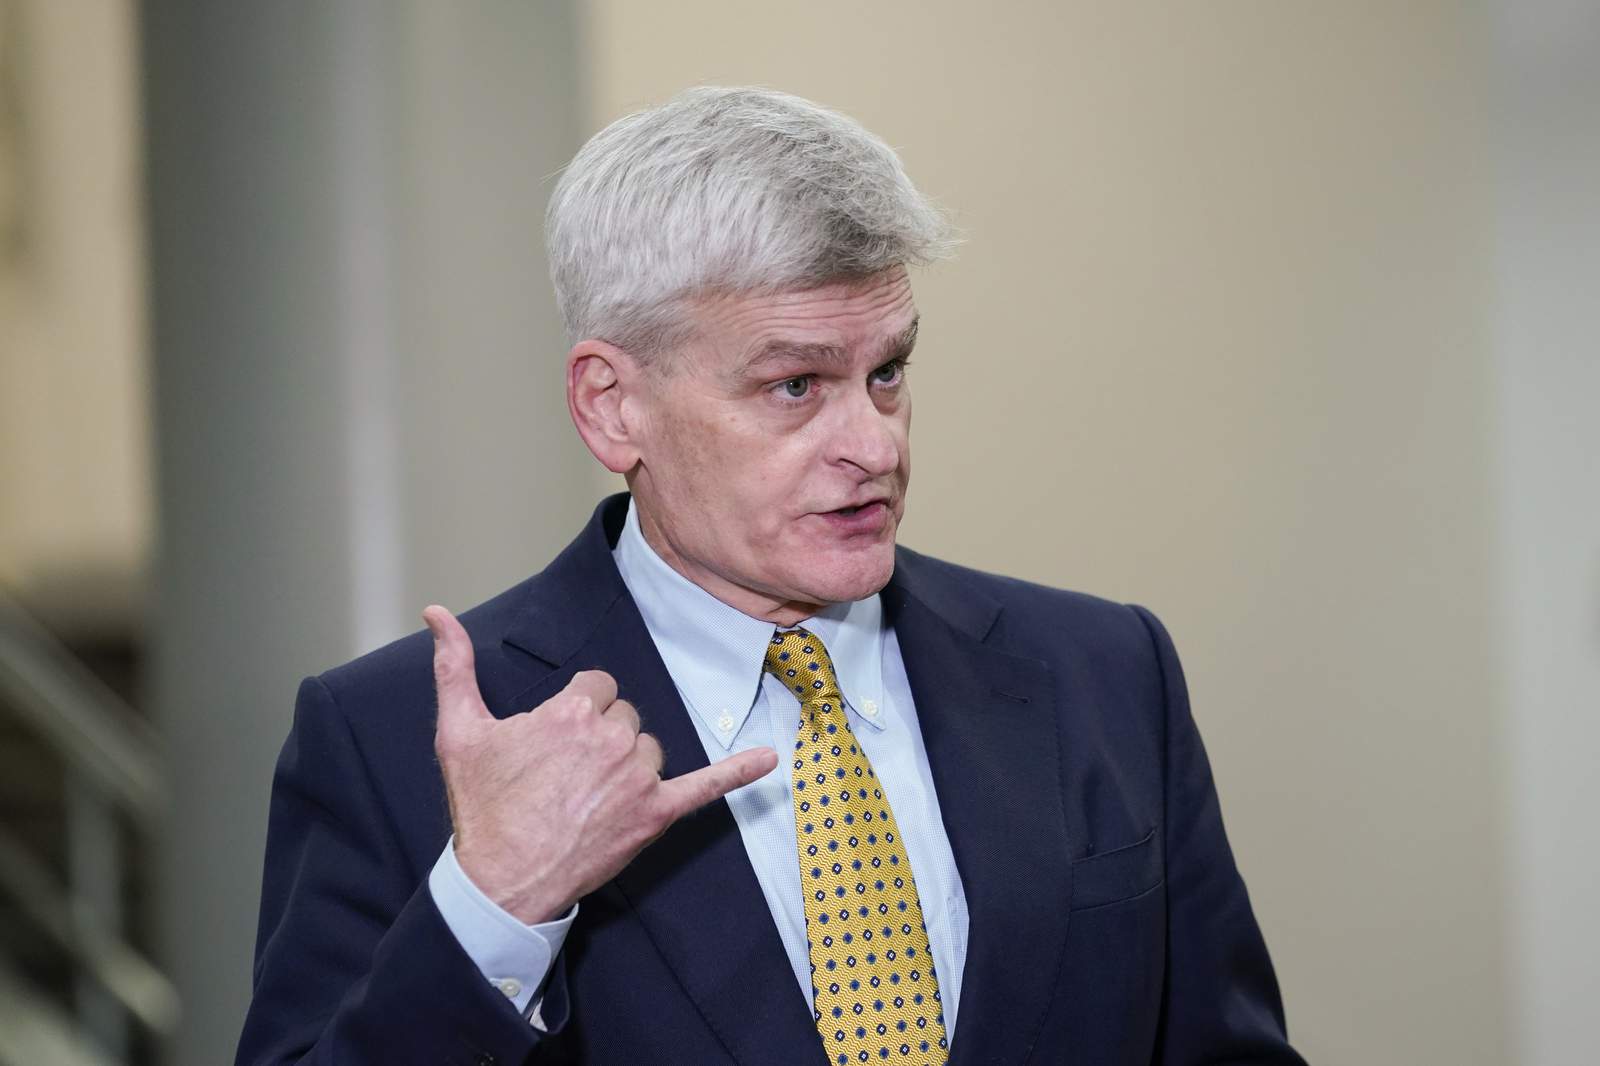 Despite GOP outcry, Cassidy 'at peace' with impeachment vote